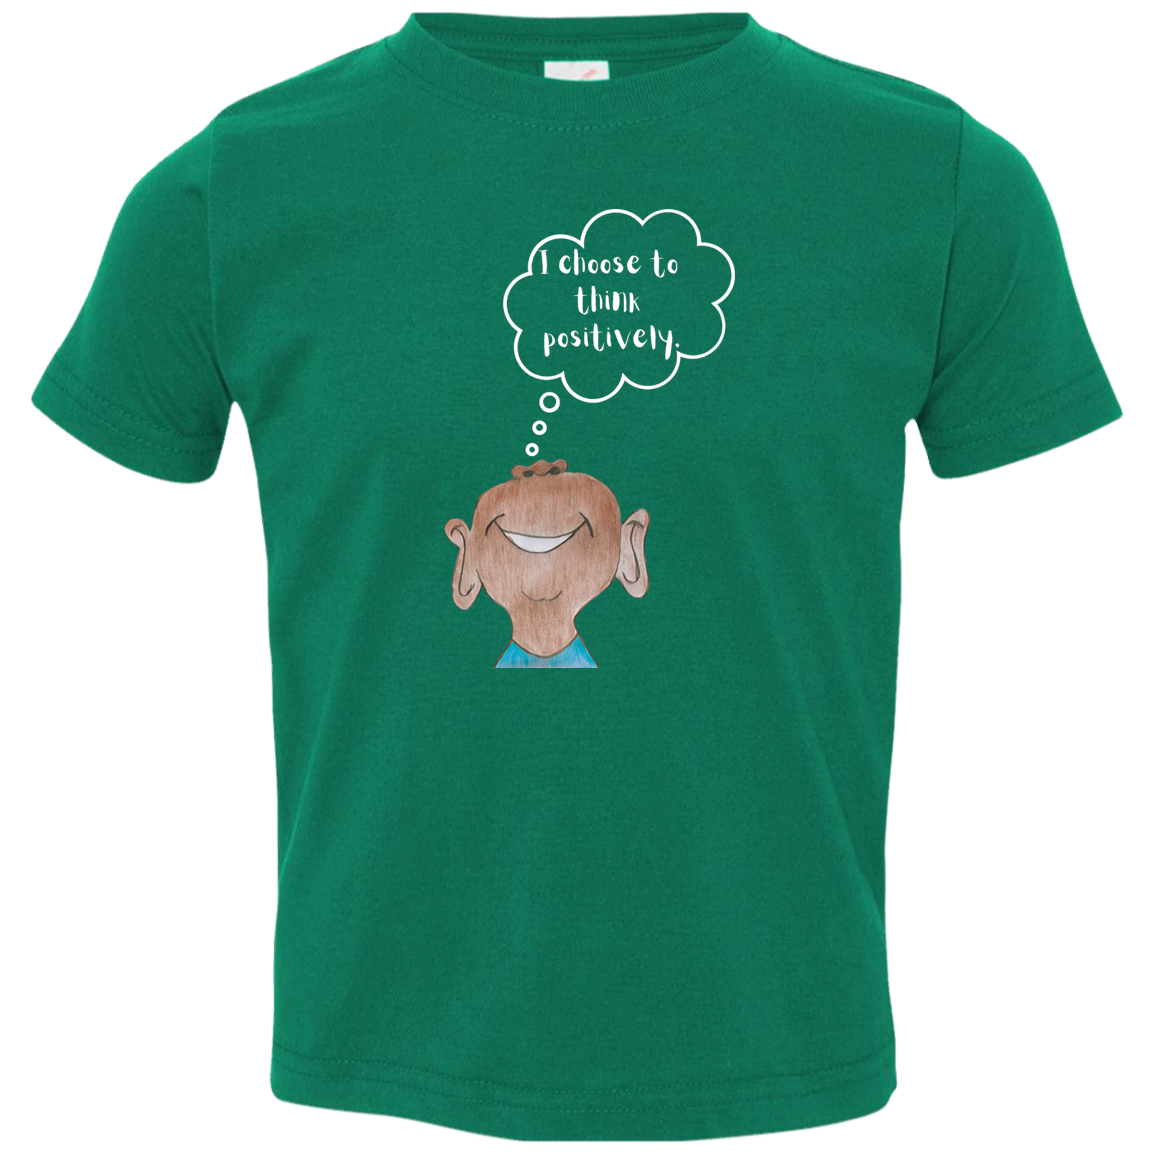 I choose to think positively. Toddler Jersey T-Shirt